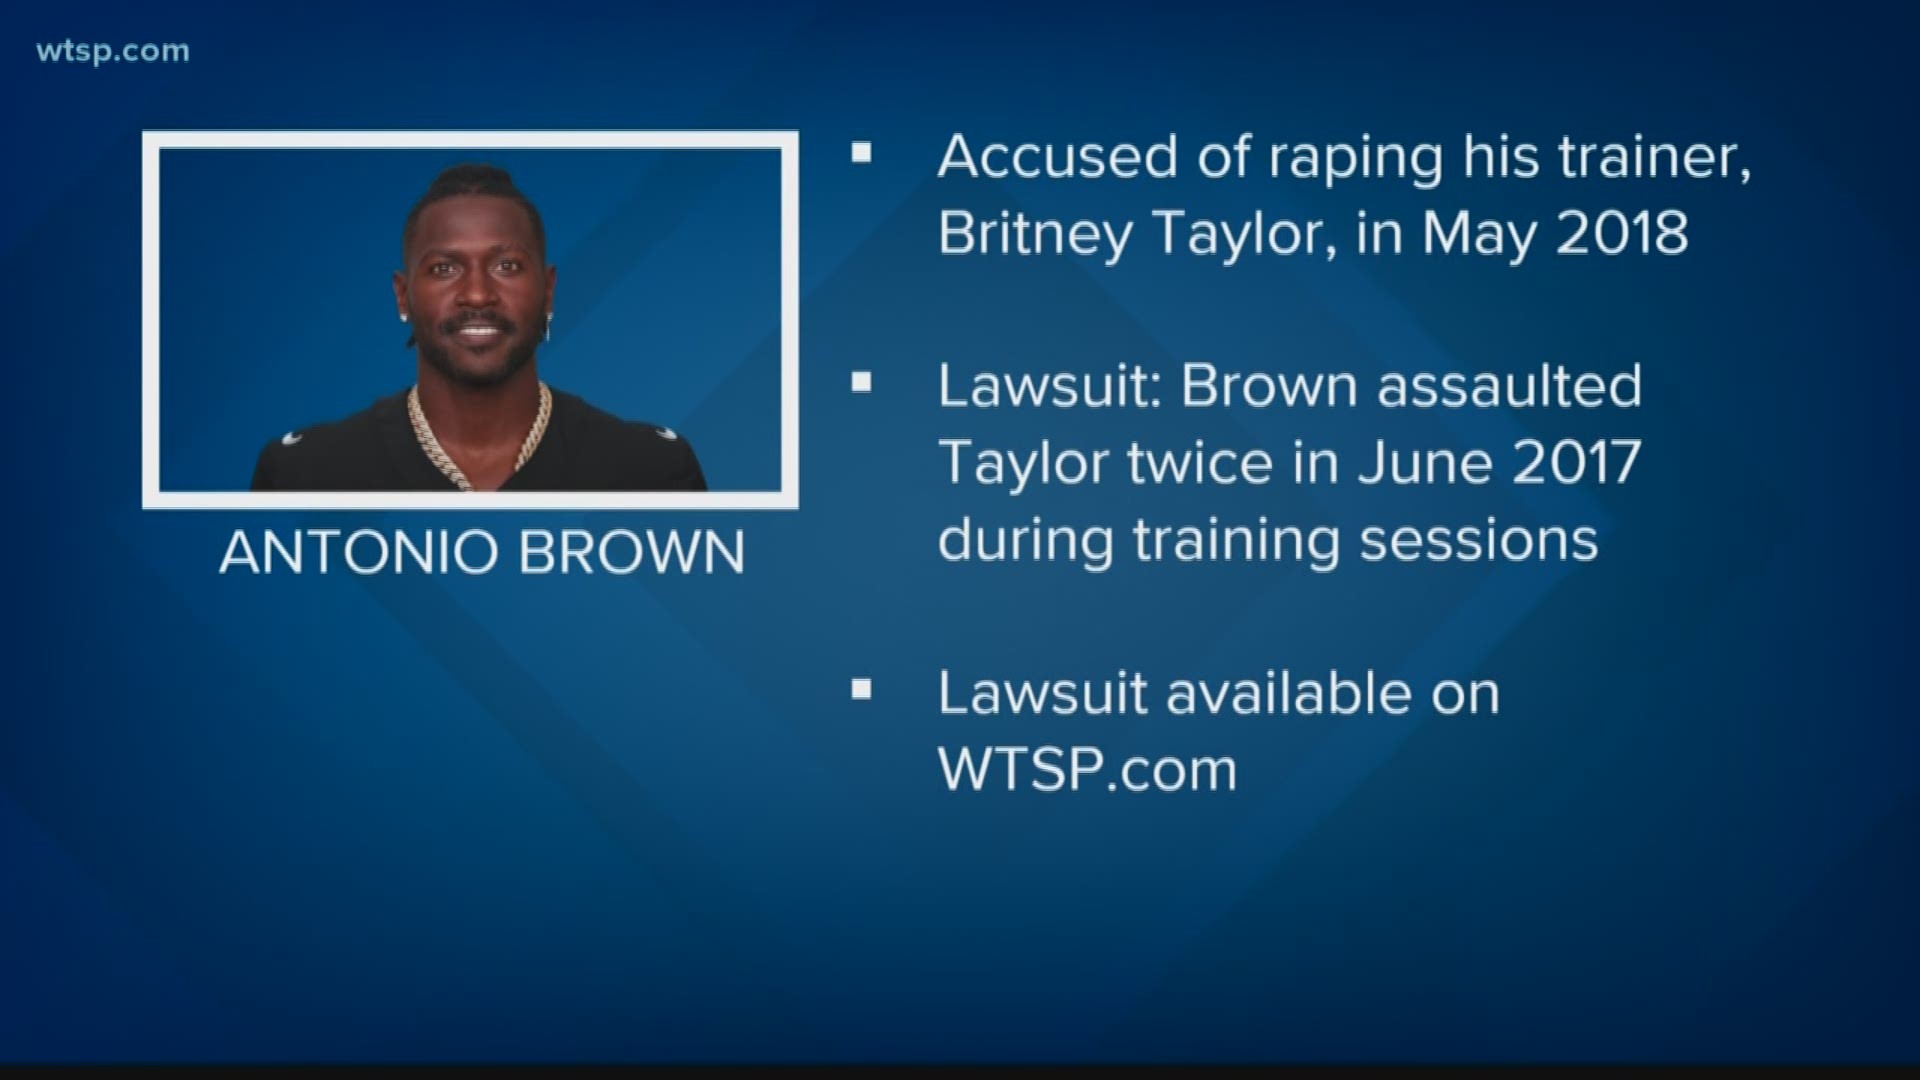 An Orlando attorney filed a lawsuit against NFL star Antonio Brown on behalf of one of Brown's former trainers, who claims he raped and sexually assaulted her.

The federal suit filed Tuesday in the Southern District of Florida alleges Brown, 31, raped 28-year-old Britney Taylor in May 2018 after a night at a club in Miami. According to the suit, Taylor pleaded with him to stop, but he allegedly pinned her down so she could not fight back.